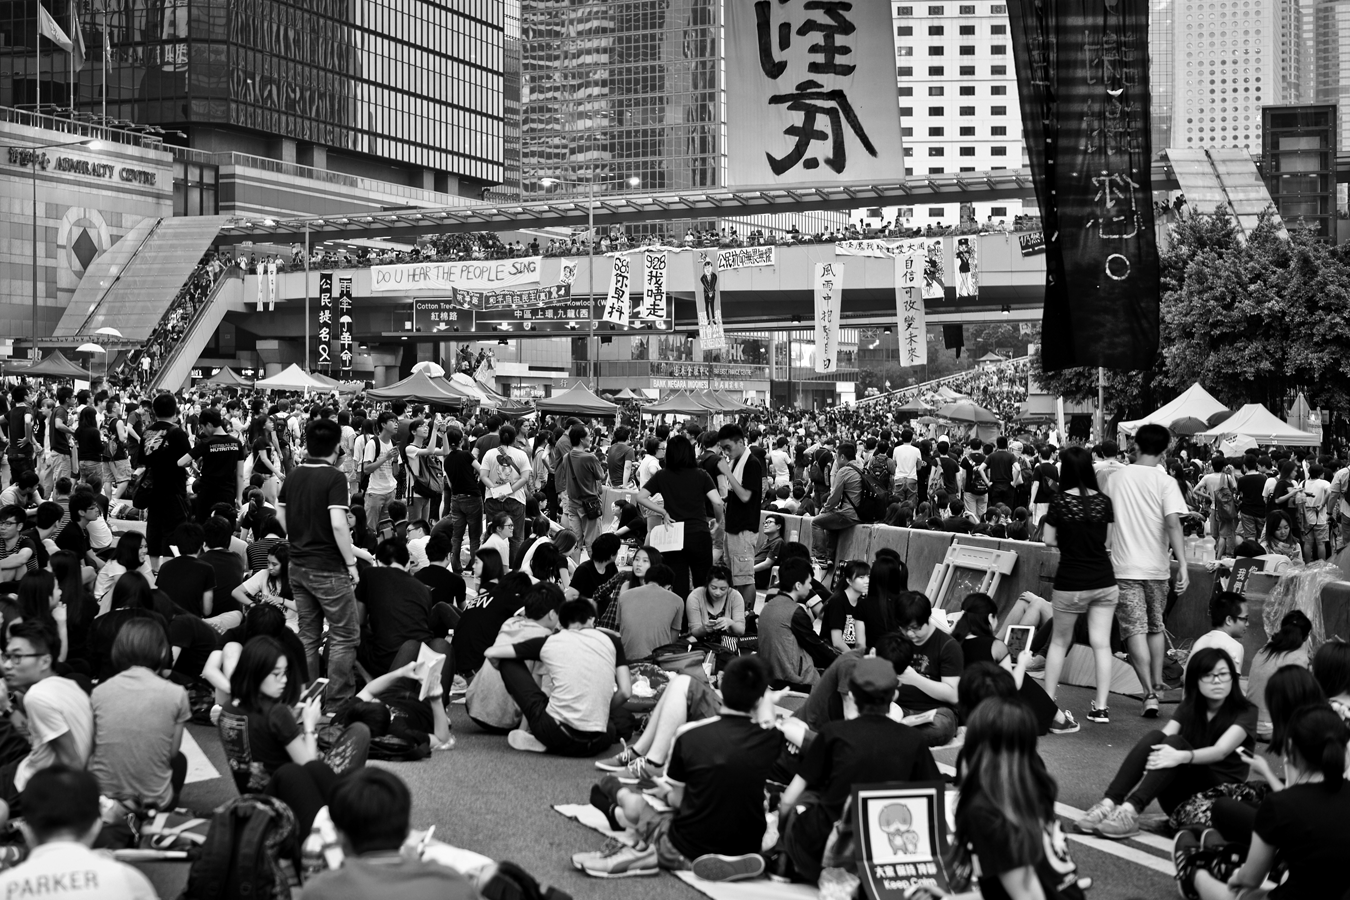 Hong Kong triads: the historical and political evolution of urban criminal  polity